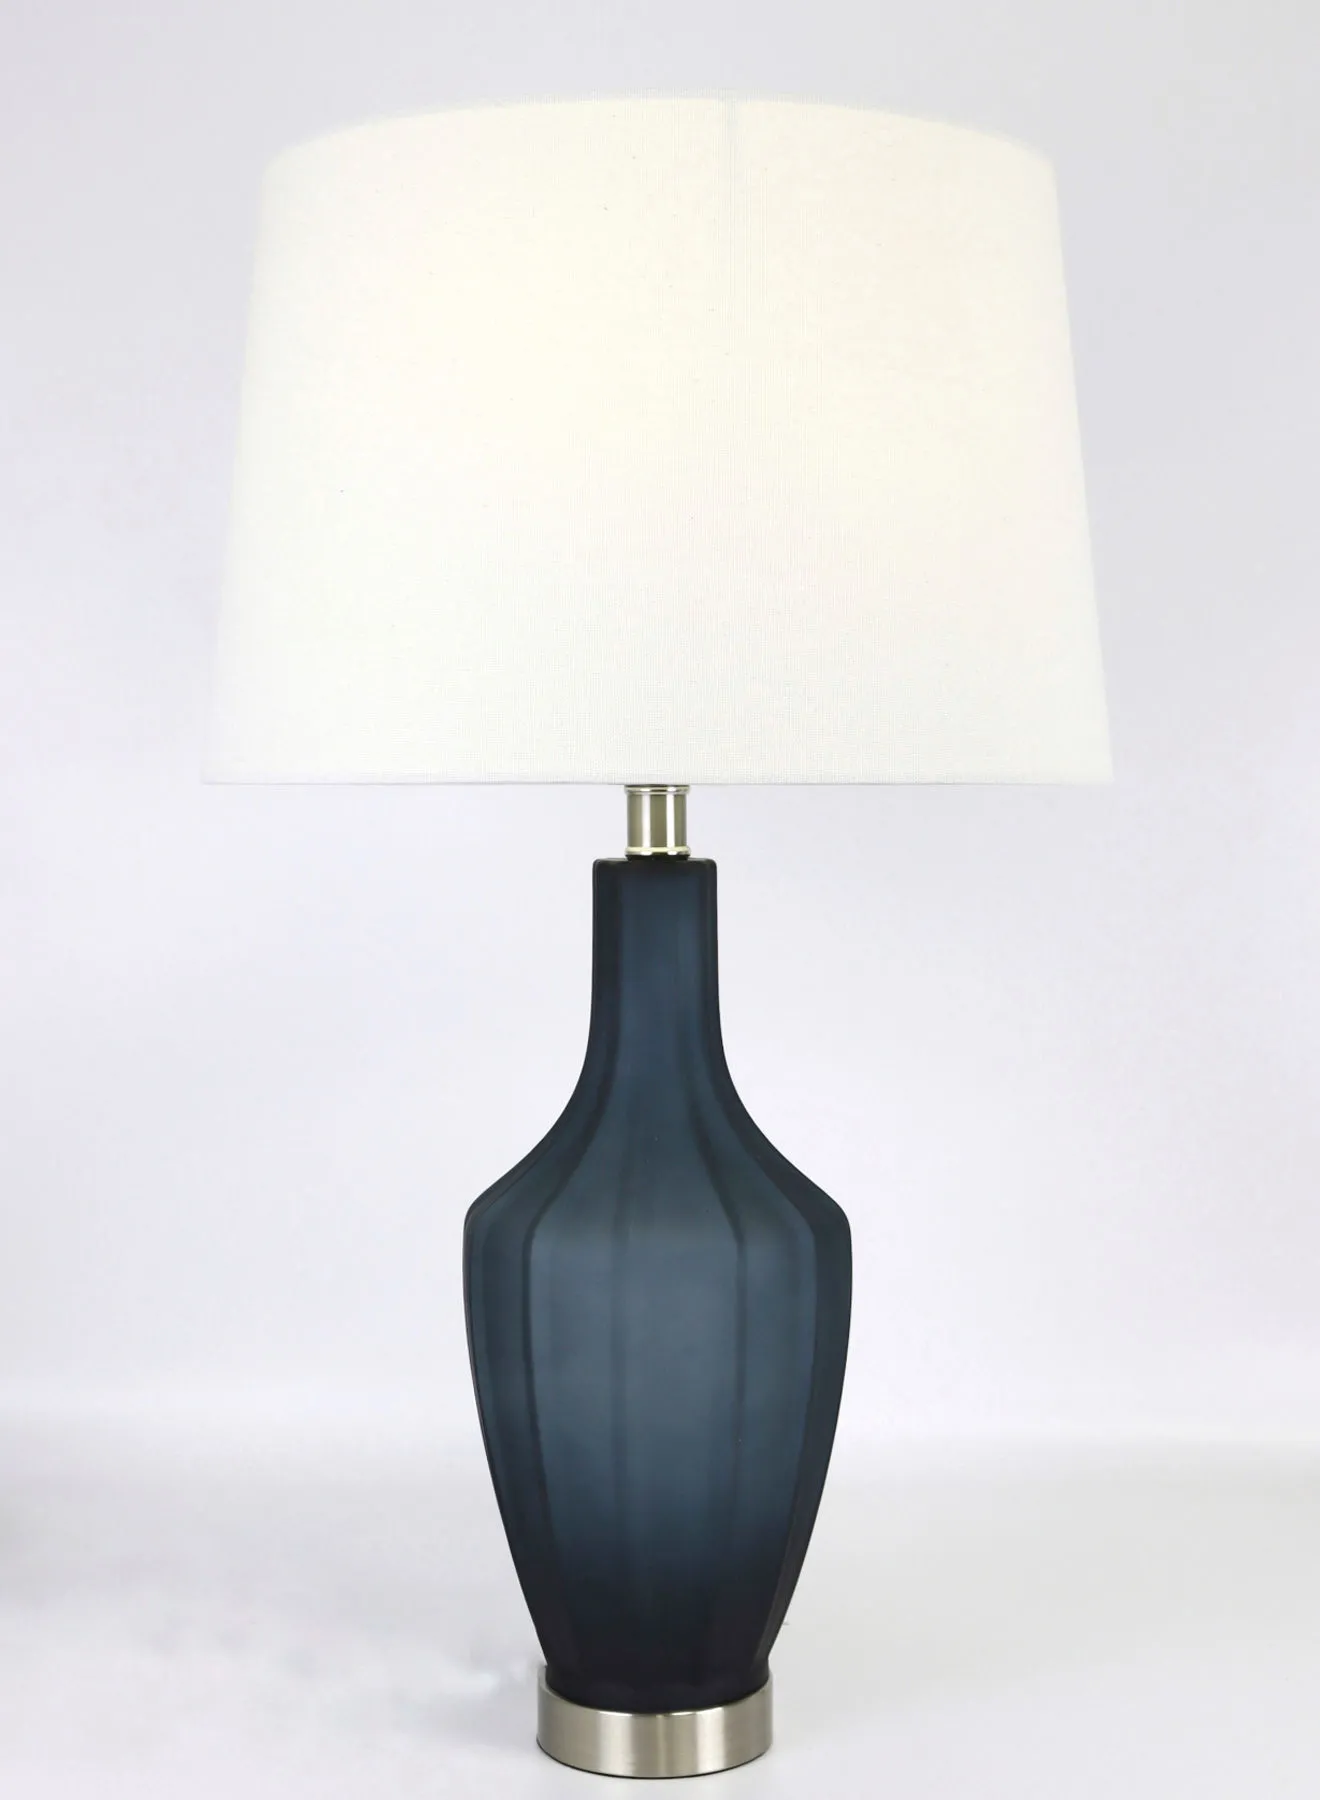 ebb & flow Modern Design Glass Table Lamp Unique Luxury Quality Material for the Perfect Stylish Home RSN71020 Blue 15 x 25.5